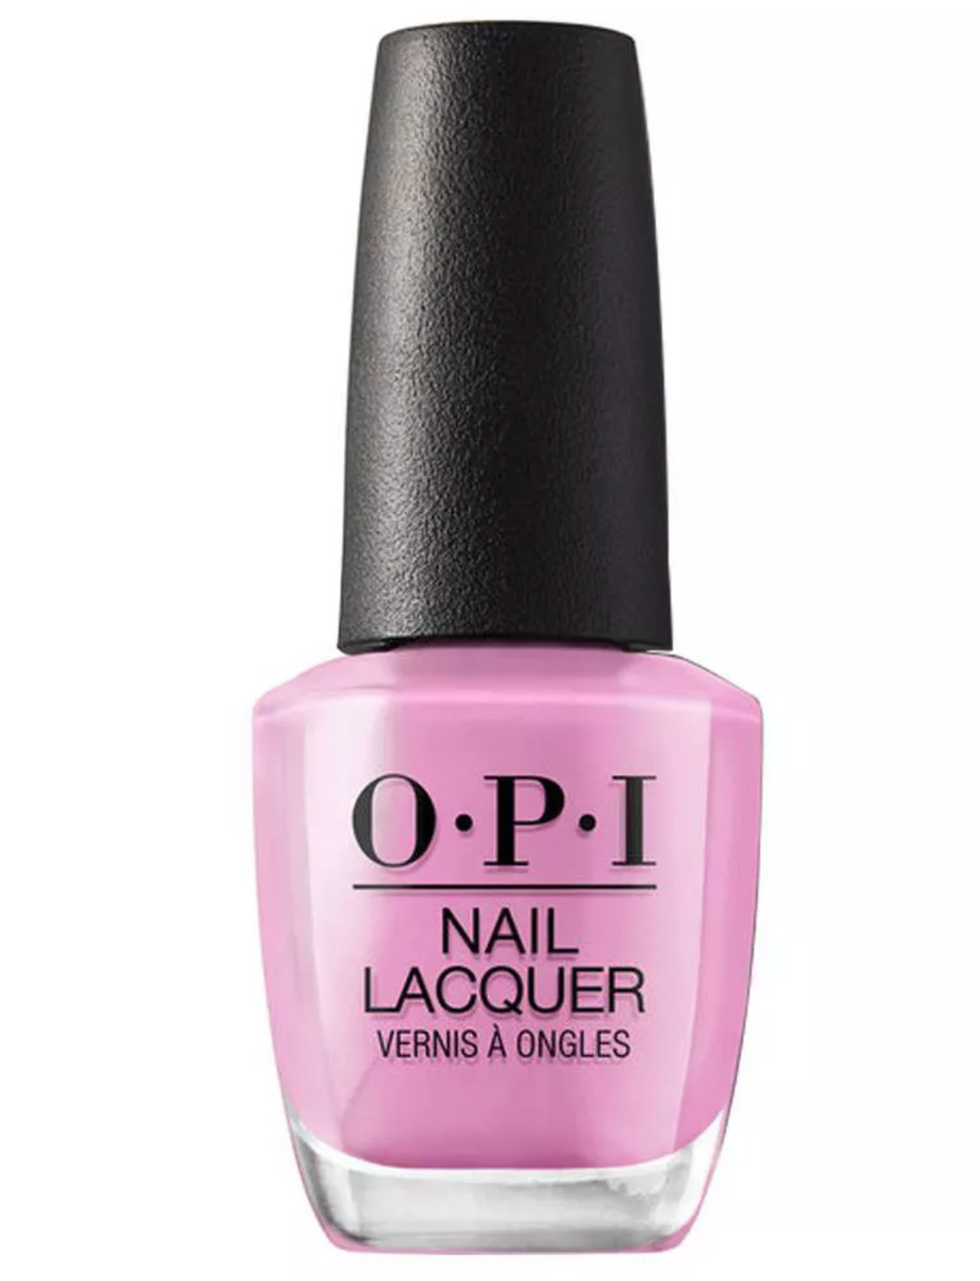 OPI Nail Lacquer in Lucky Lavender